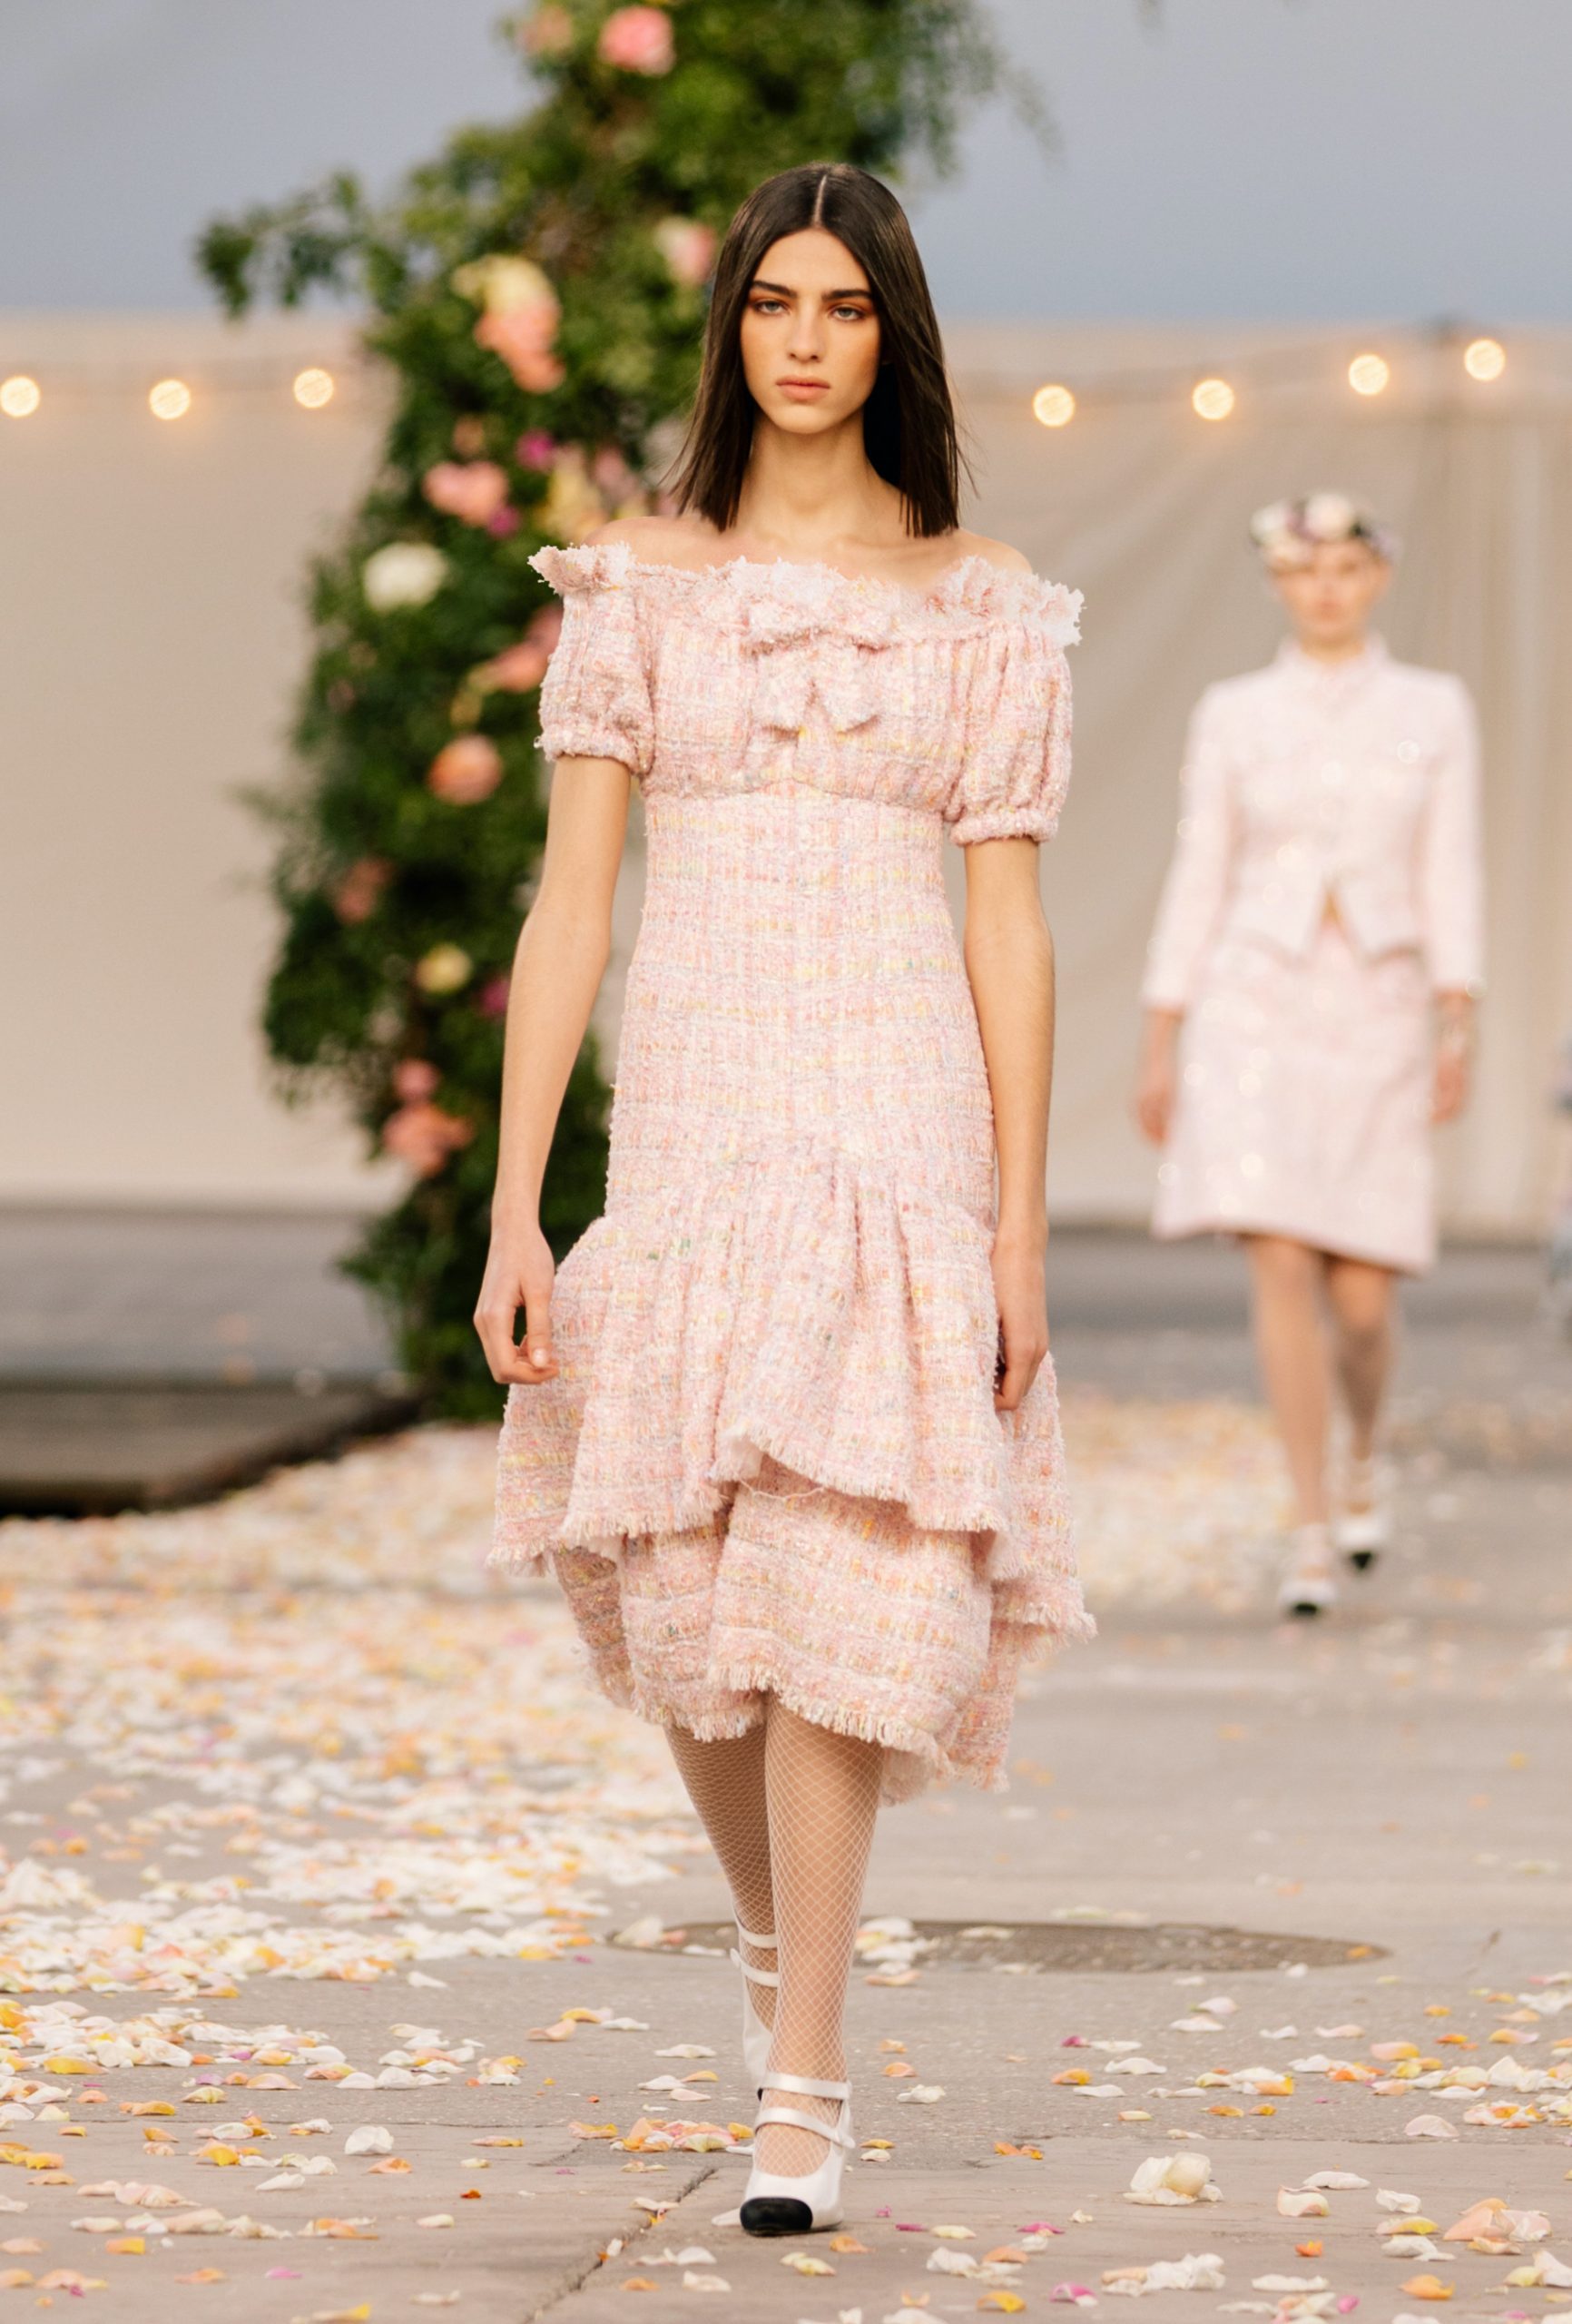 Ruffles Spring 2021 Couture Trend | The Impression